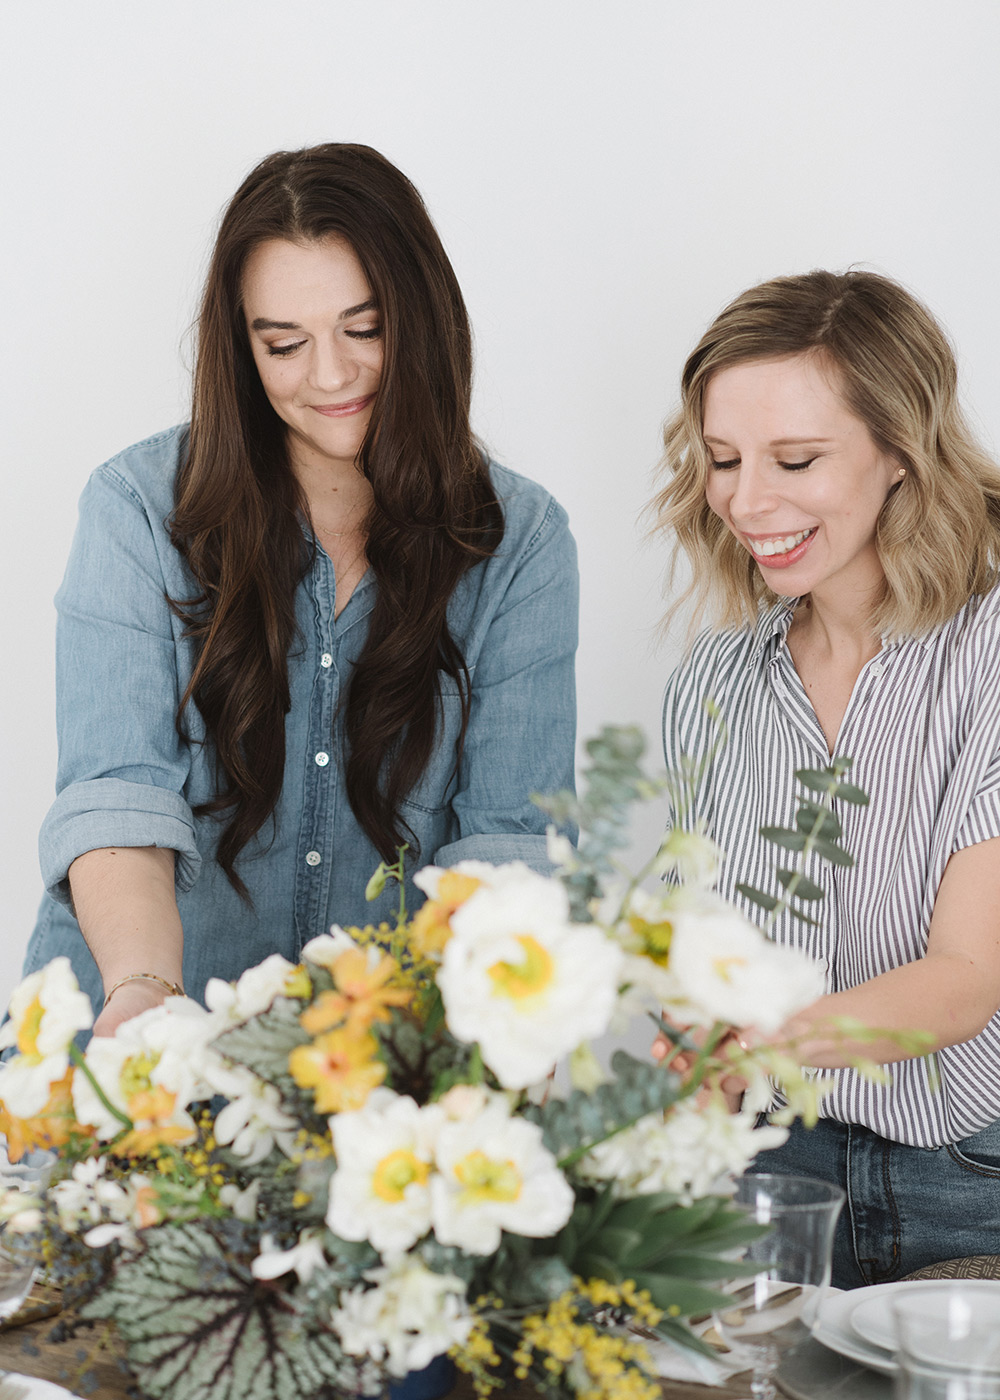 Get your wedding planning on track with these three tips in a Live Workshop with The Firefly Method